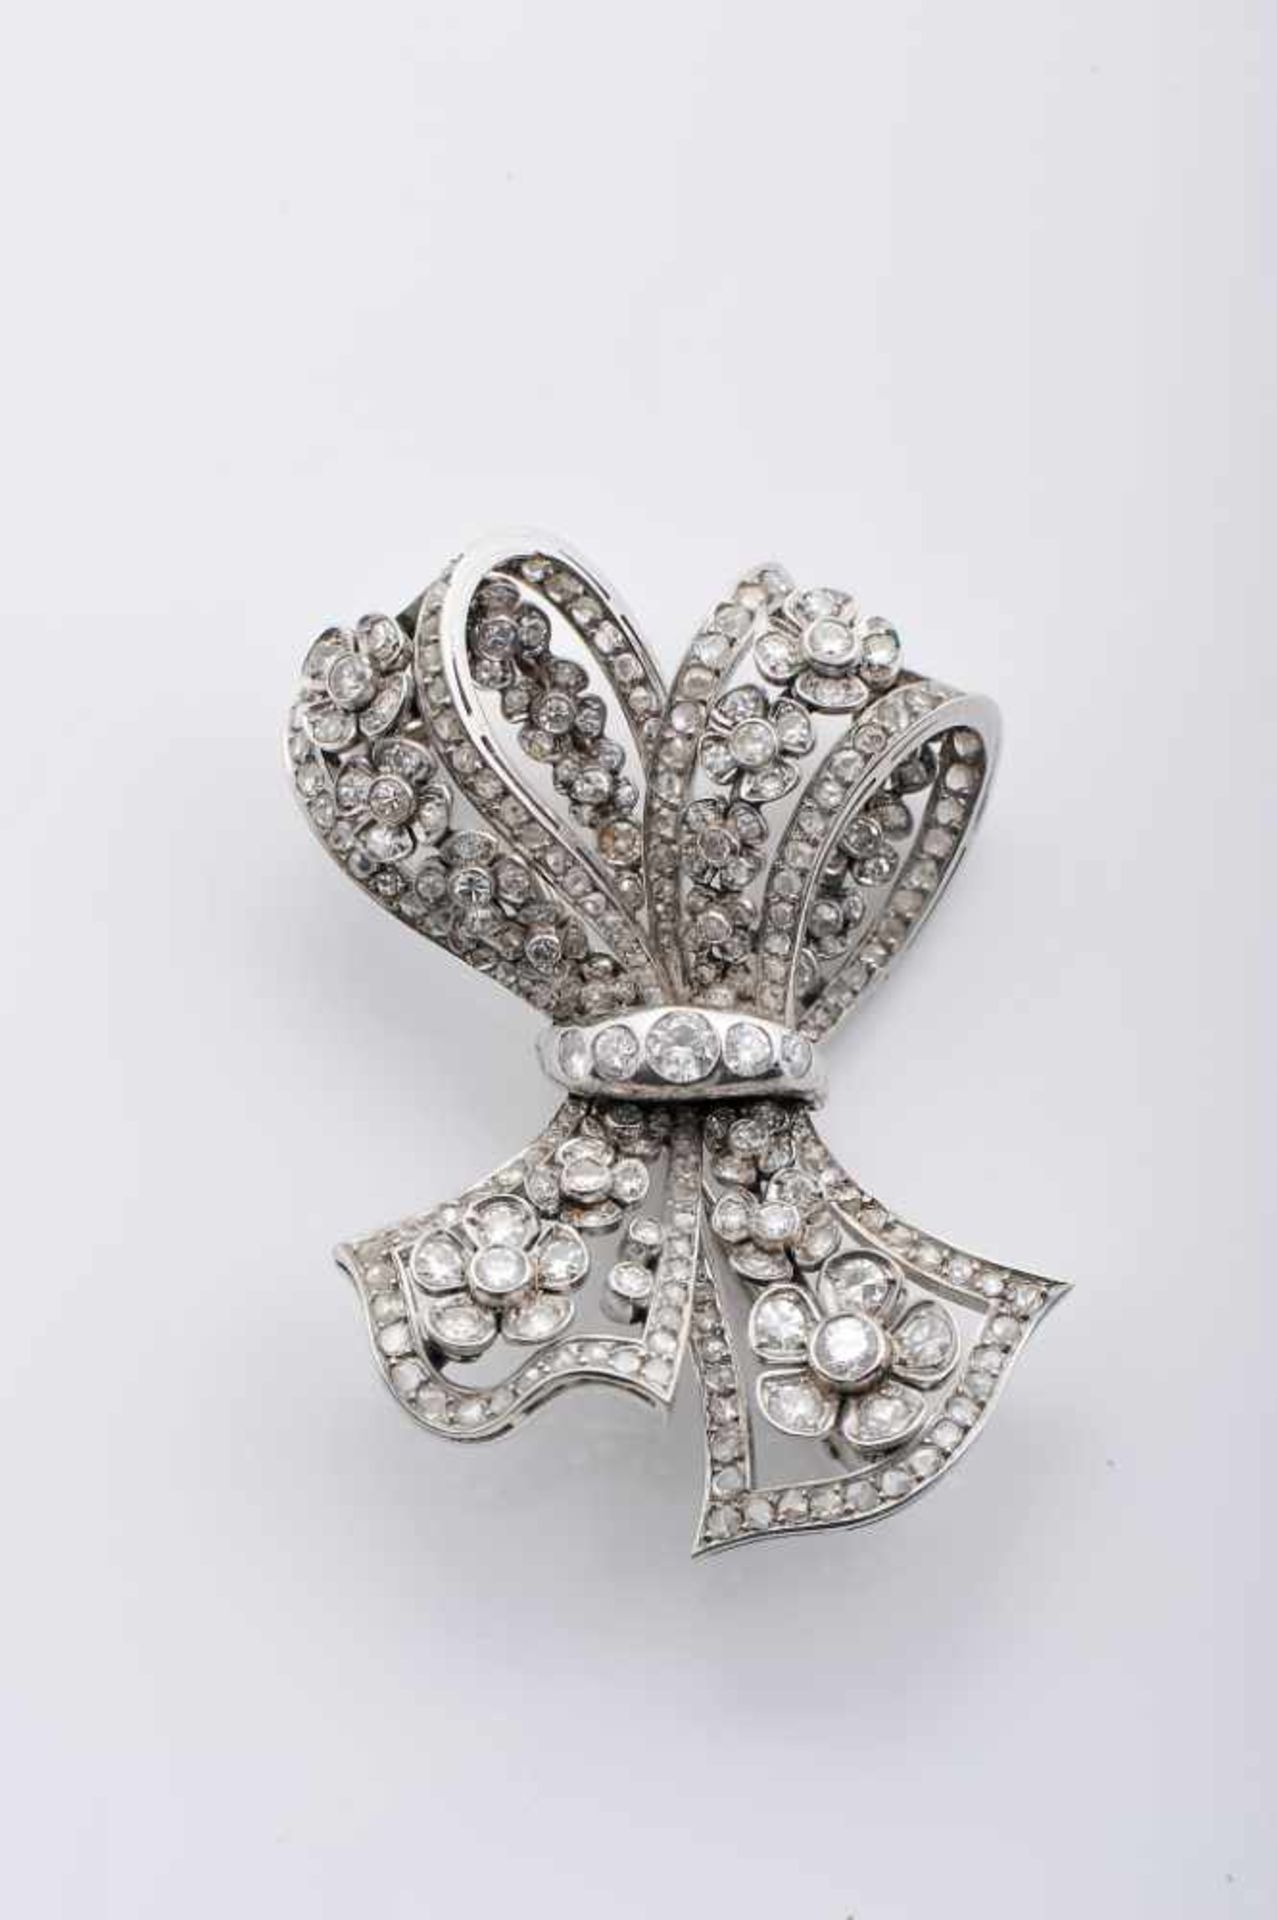 A Bow BroochA Bow Brooch, 500/1000 platinum and 800/1000 gold, set with rose cut diamonds, 164 8/8